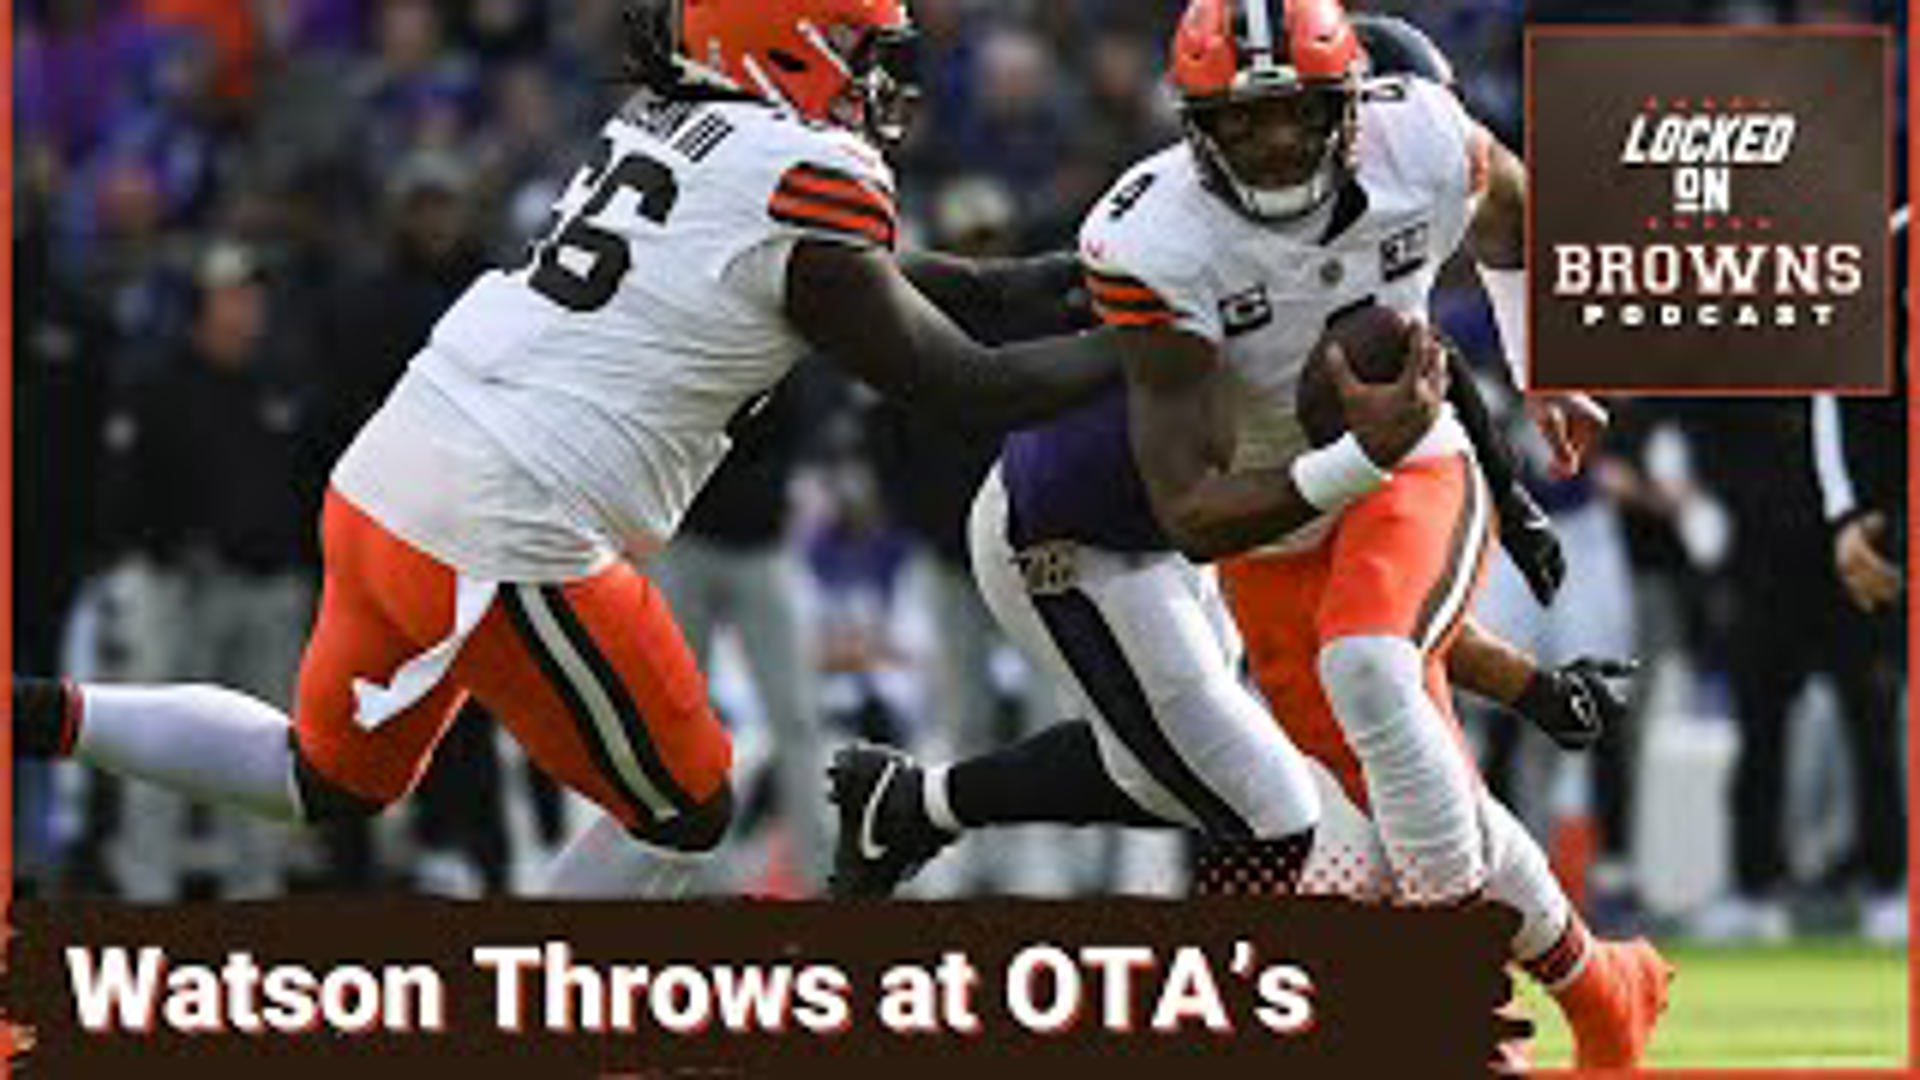 Cleveland Browns quarterback Deshaun Watson threw in front of the media at OTA's and as always the reviews were mixed.